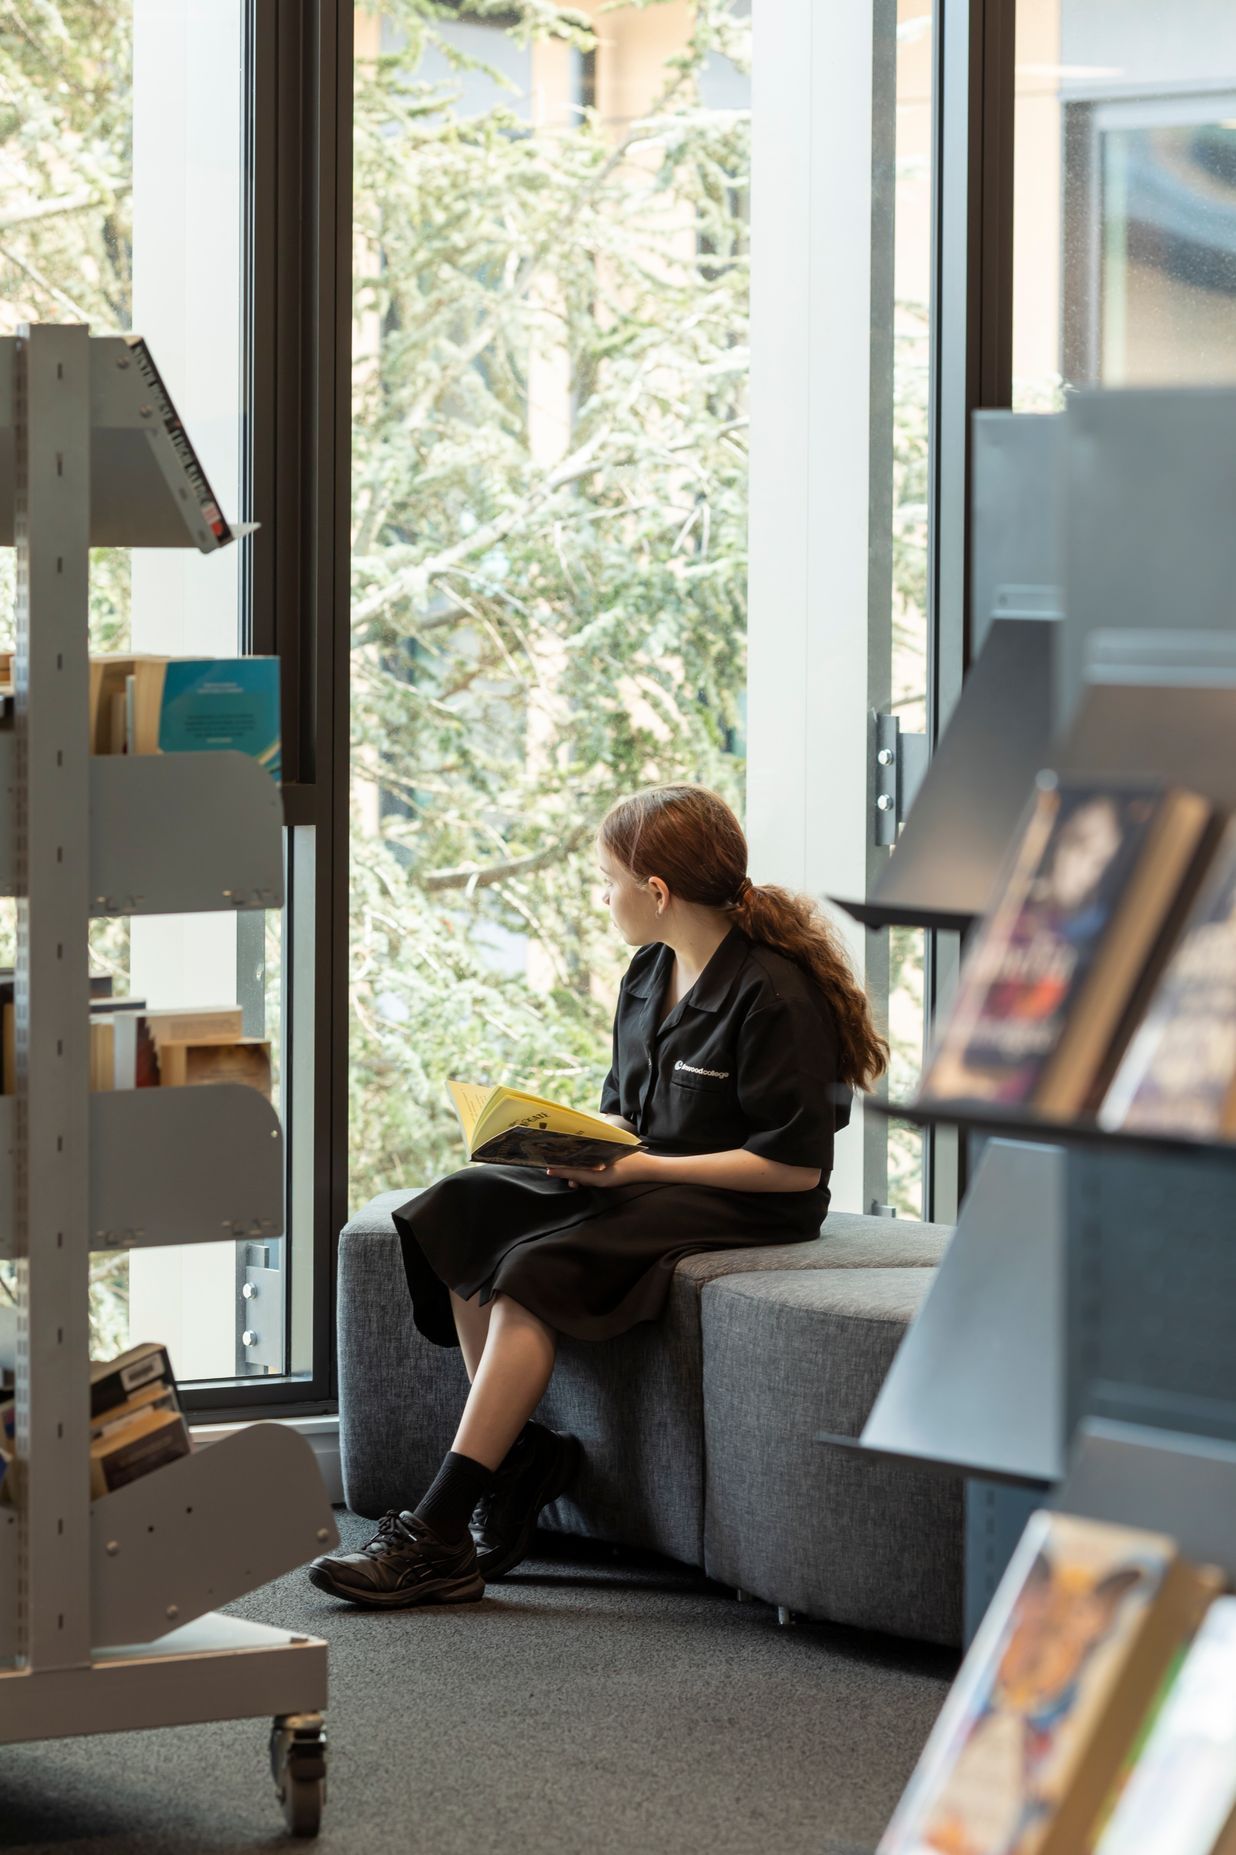 A student enjoys a quiet moment in the library.